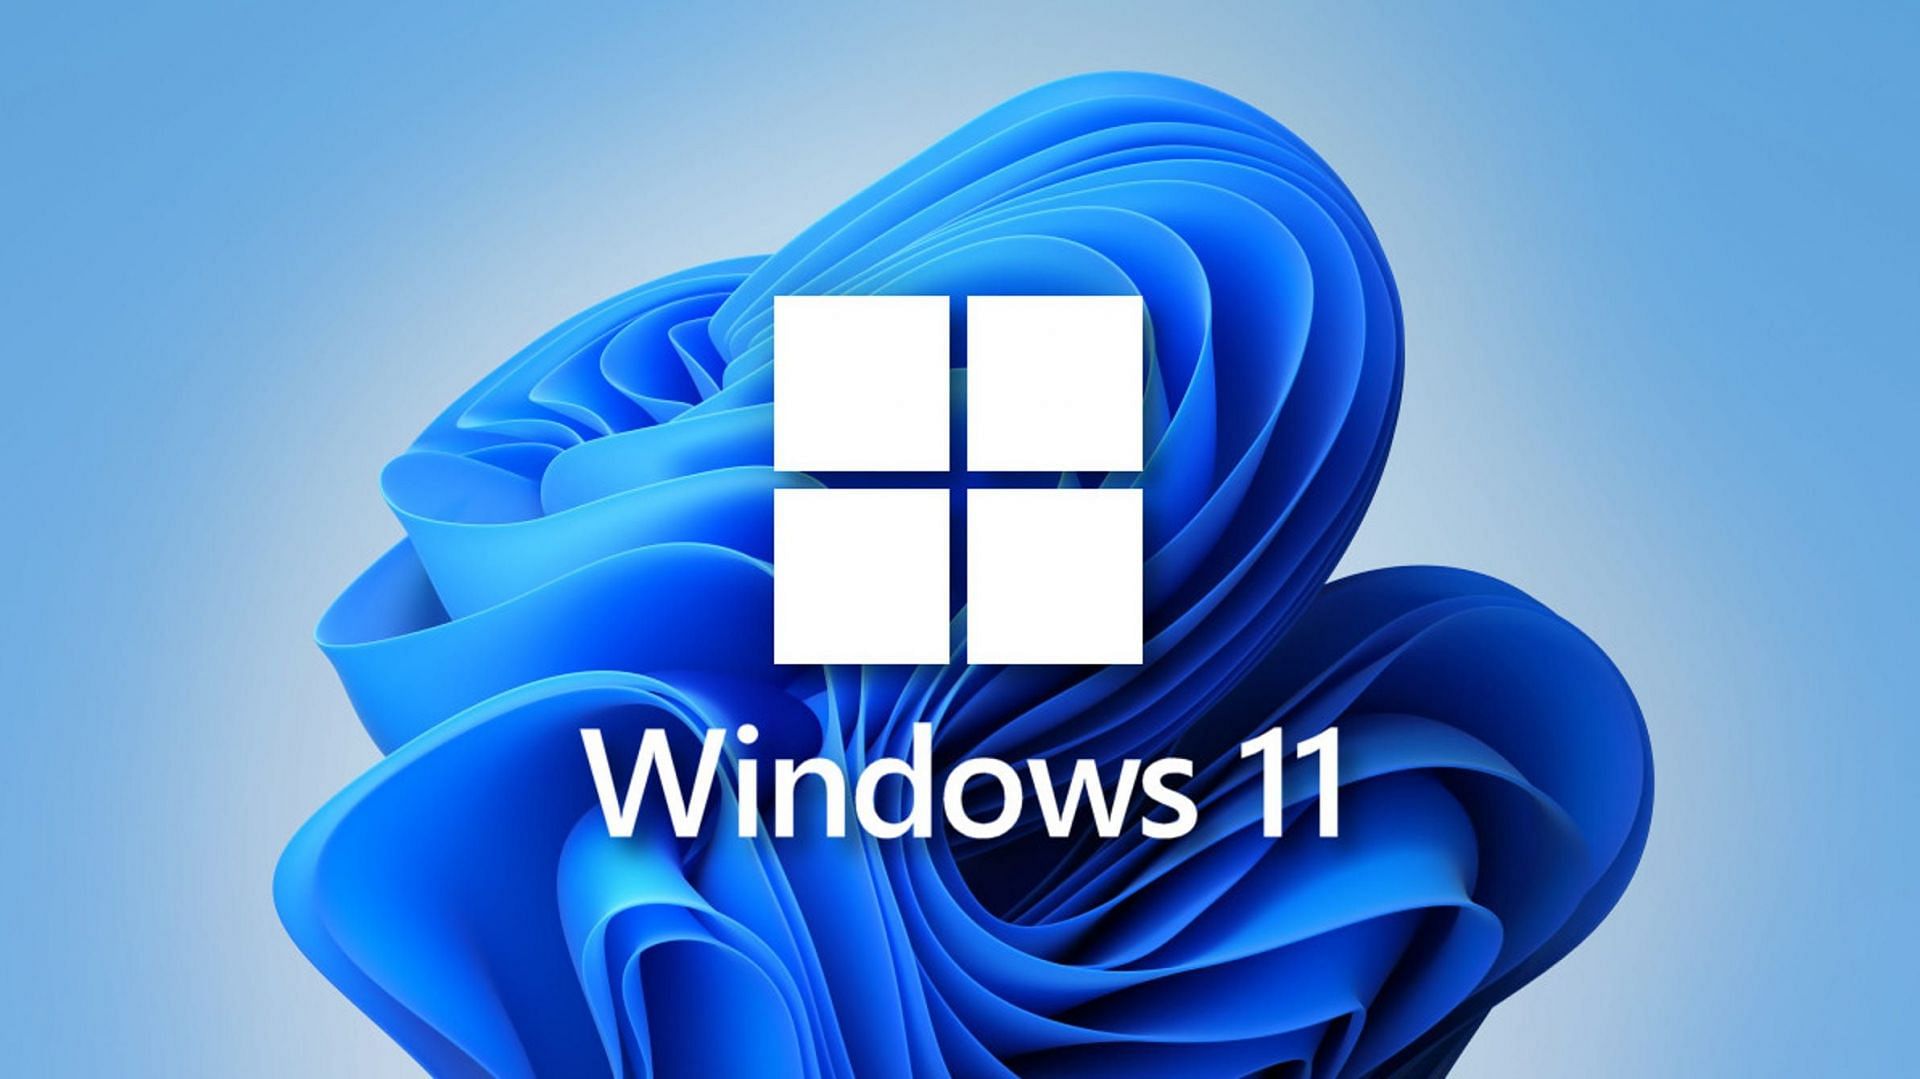 It has almost been a year since the release of Windows 11 (Image via Microsoft)